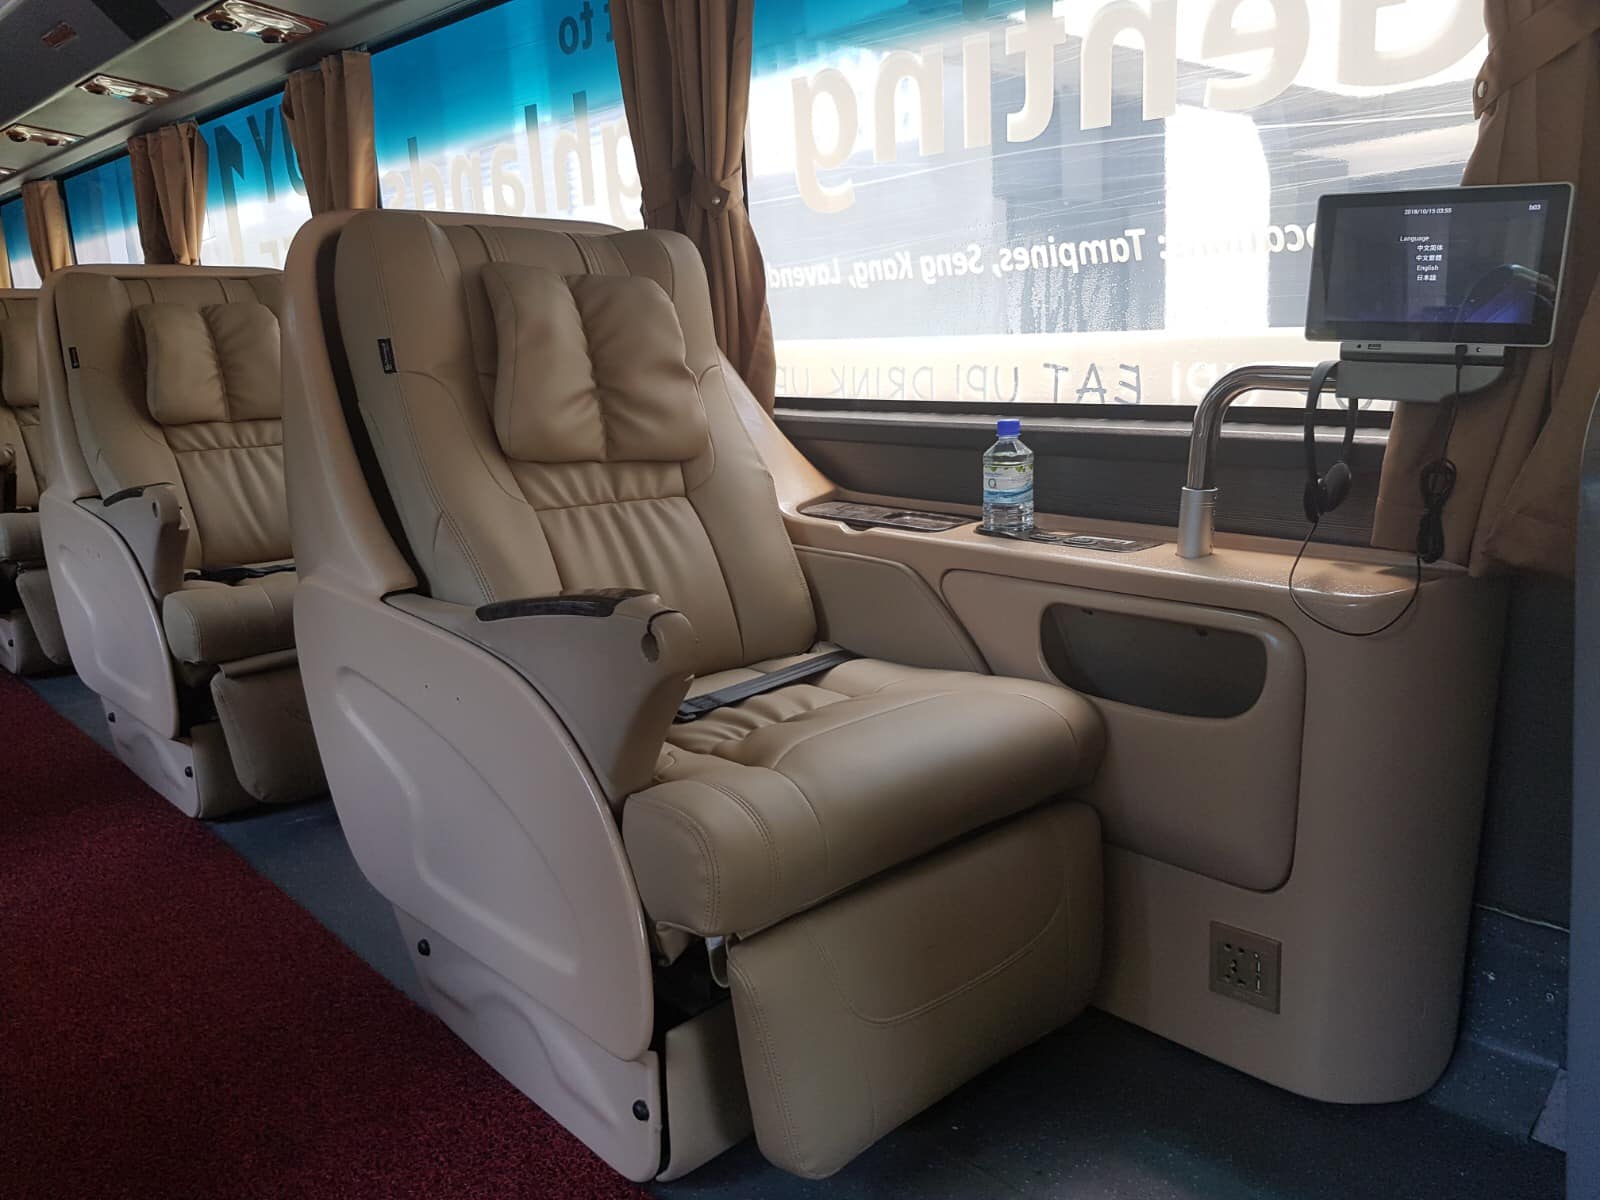 Transtar Travel First Class Solitaire Suite - more legroom and massage function in chairs